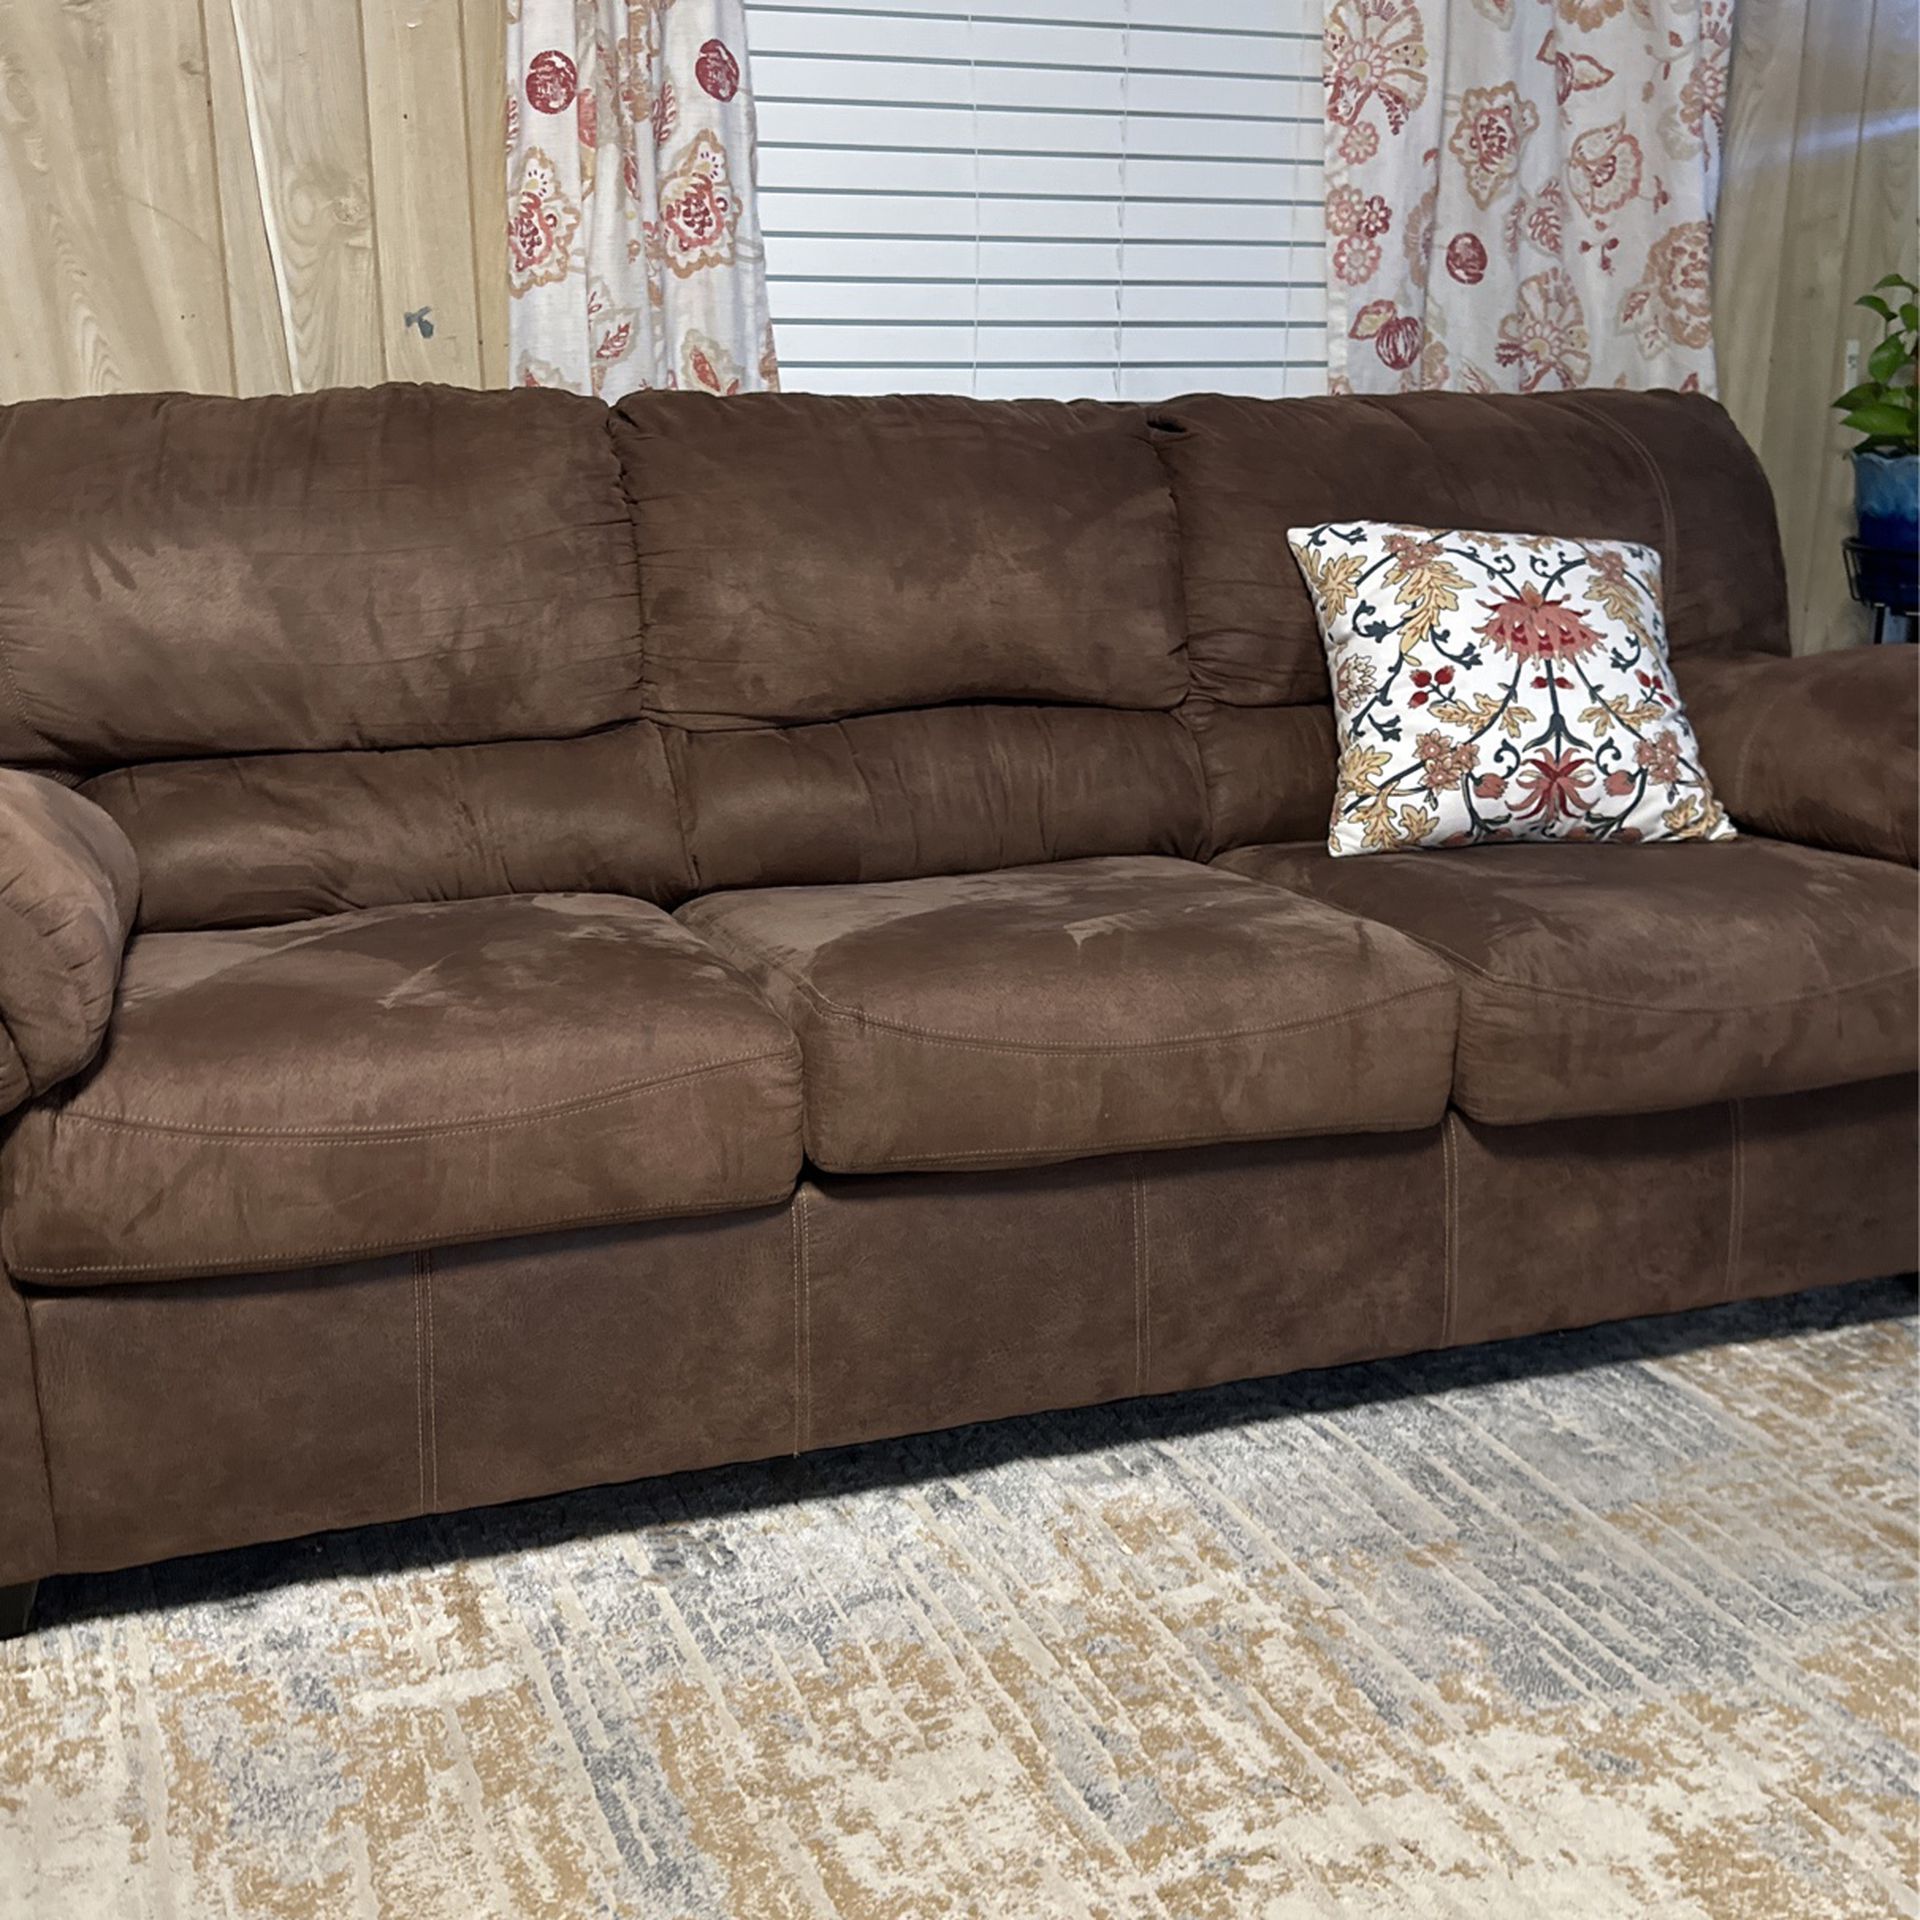 Large Couch 